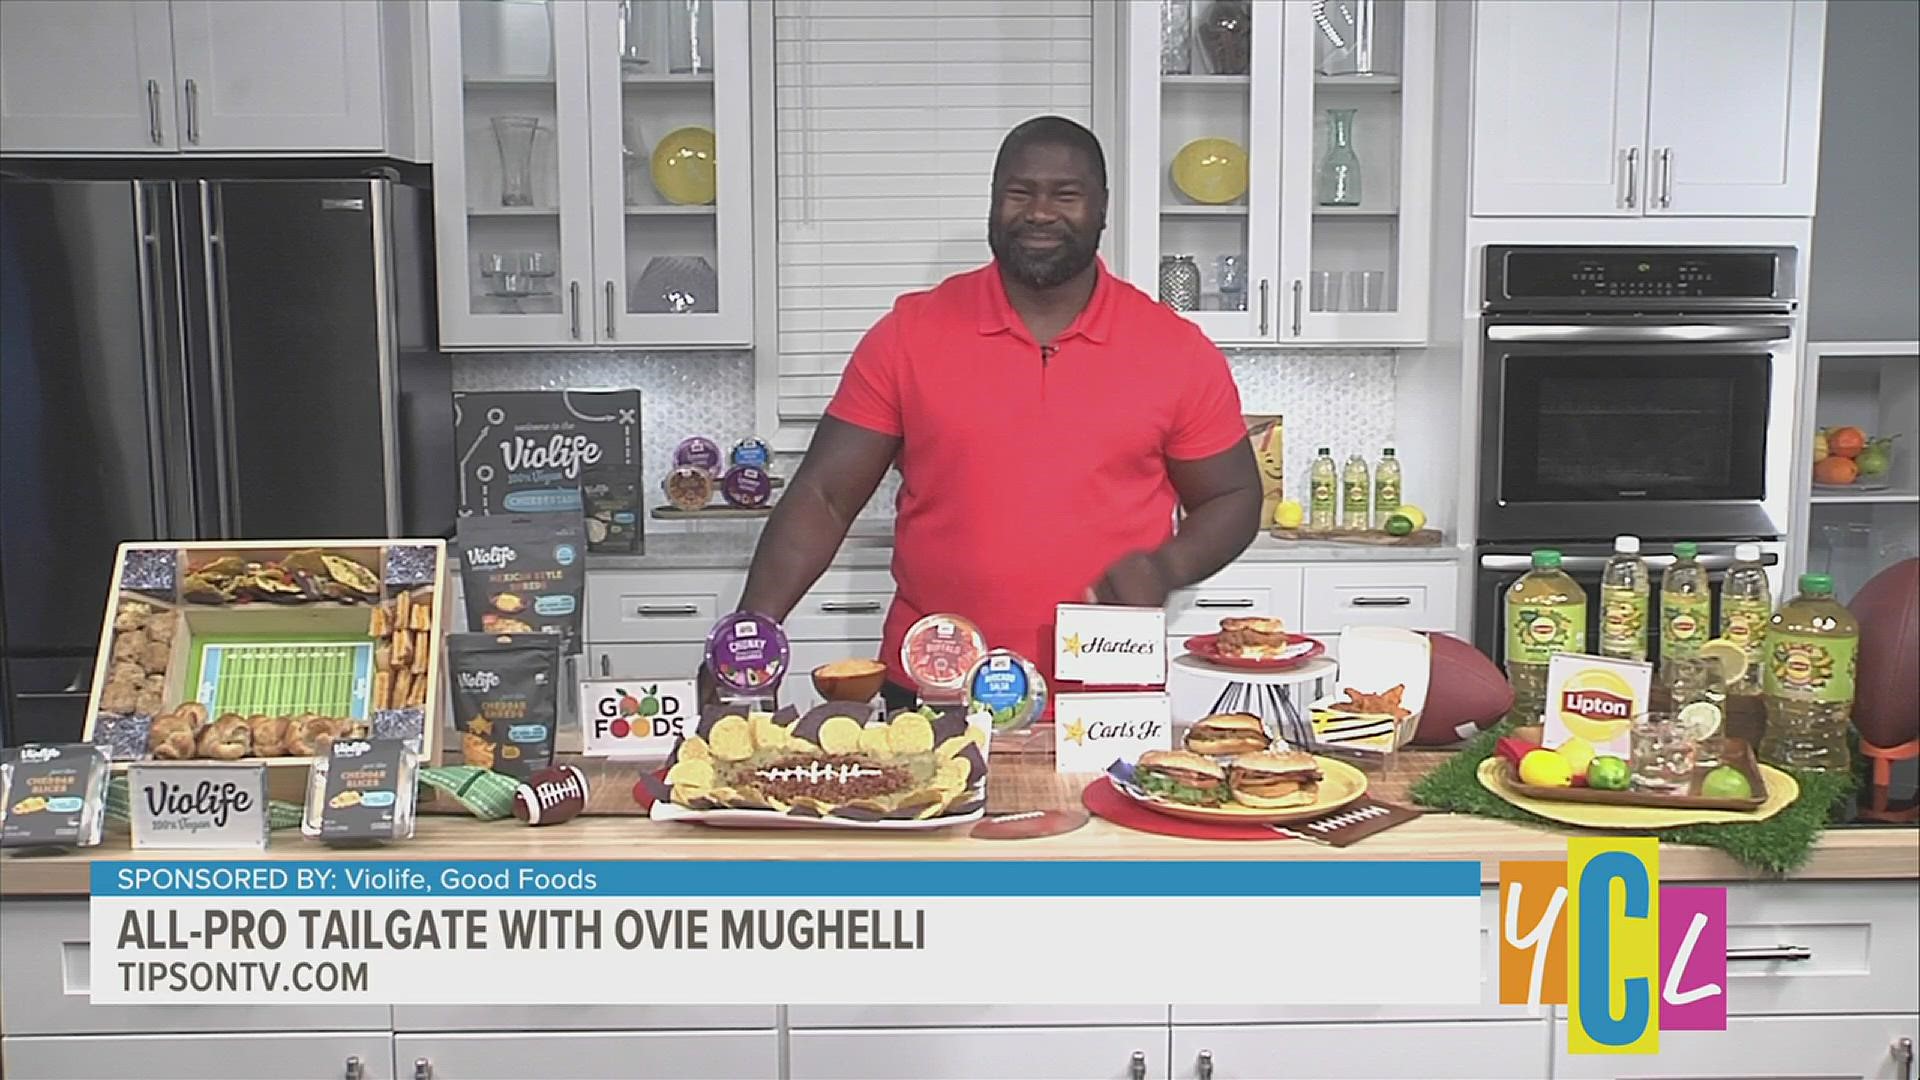 The Big Game is coming, so it's time to start prepping for a super watch party with former NFL player, Ovie Mughelli! This segment is paid by Violife and Good Foods.